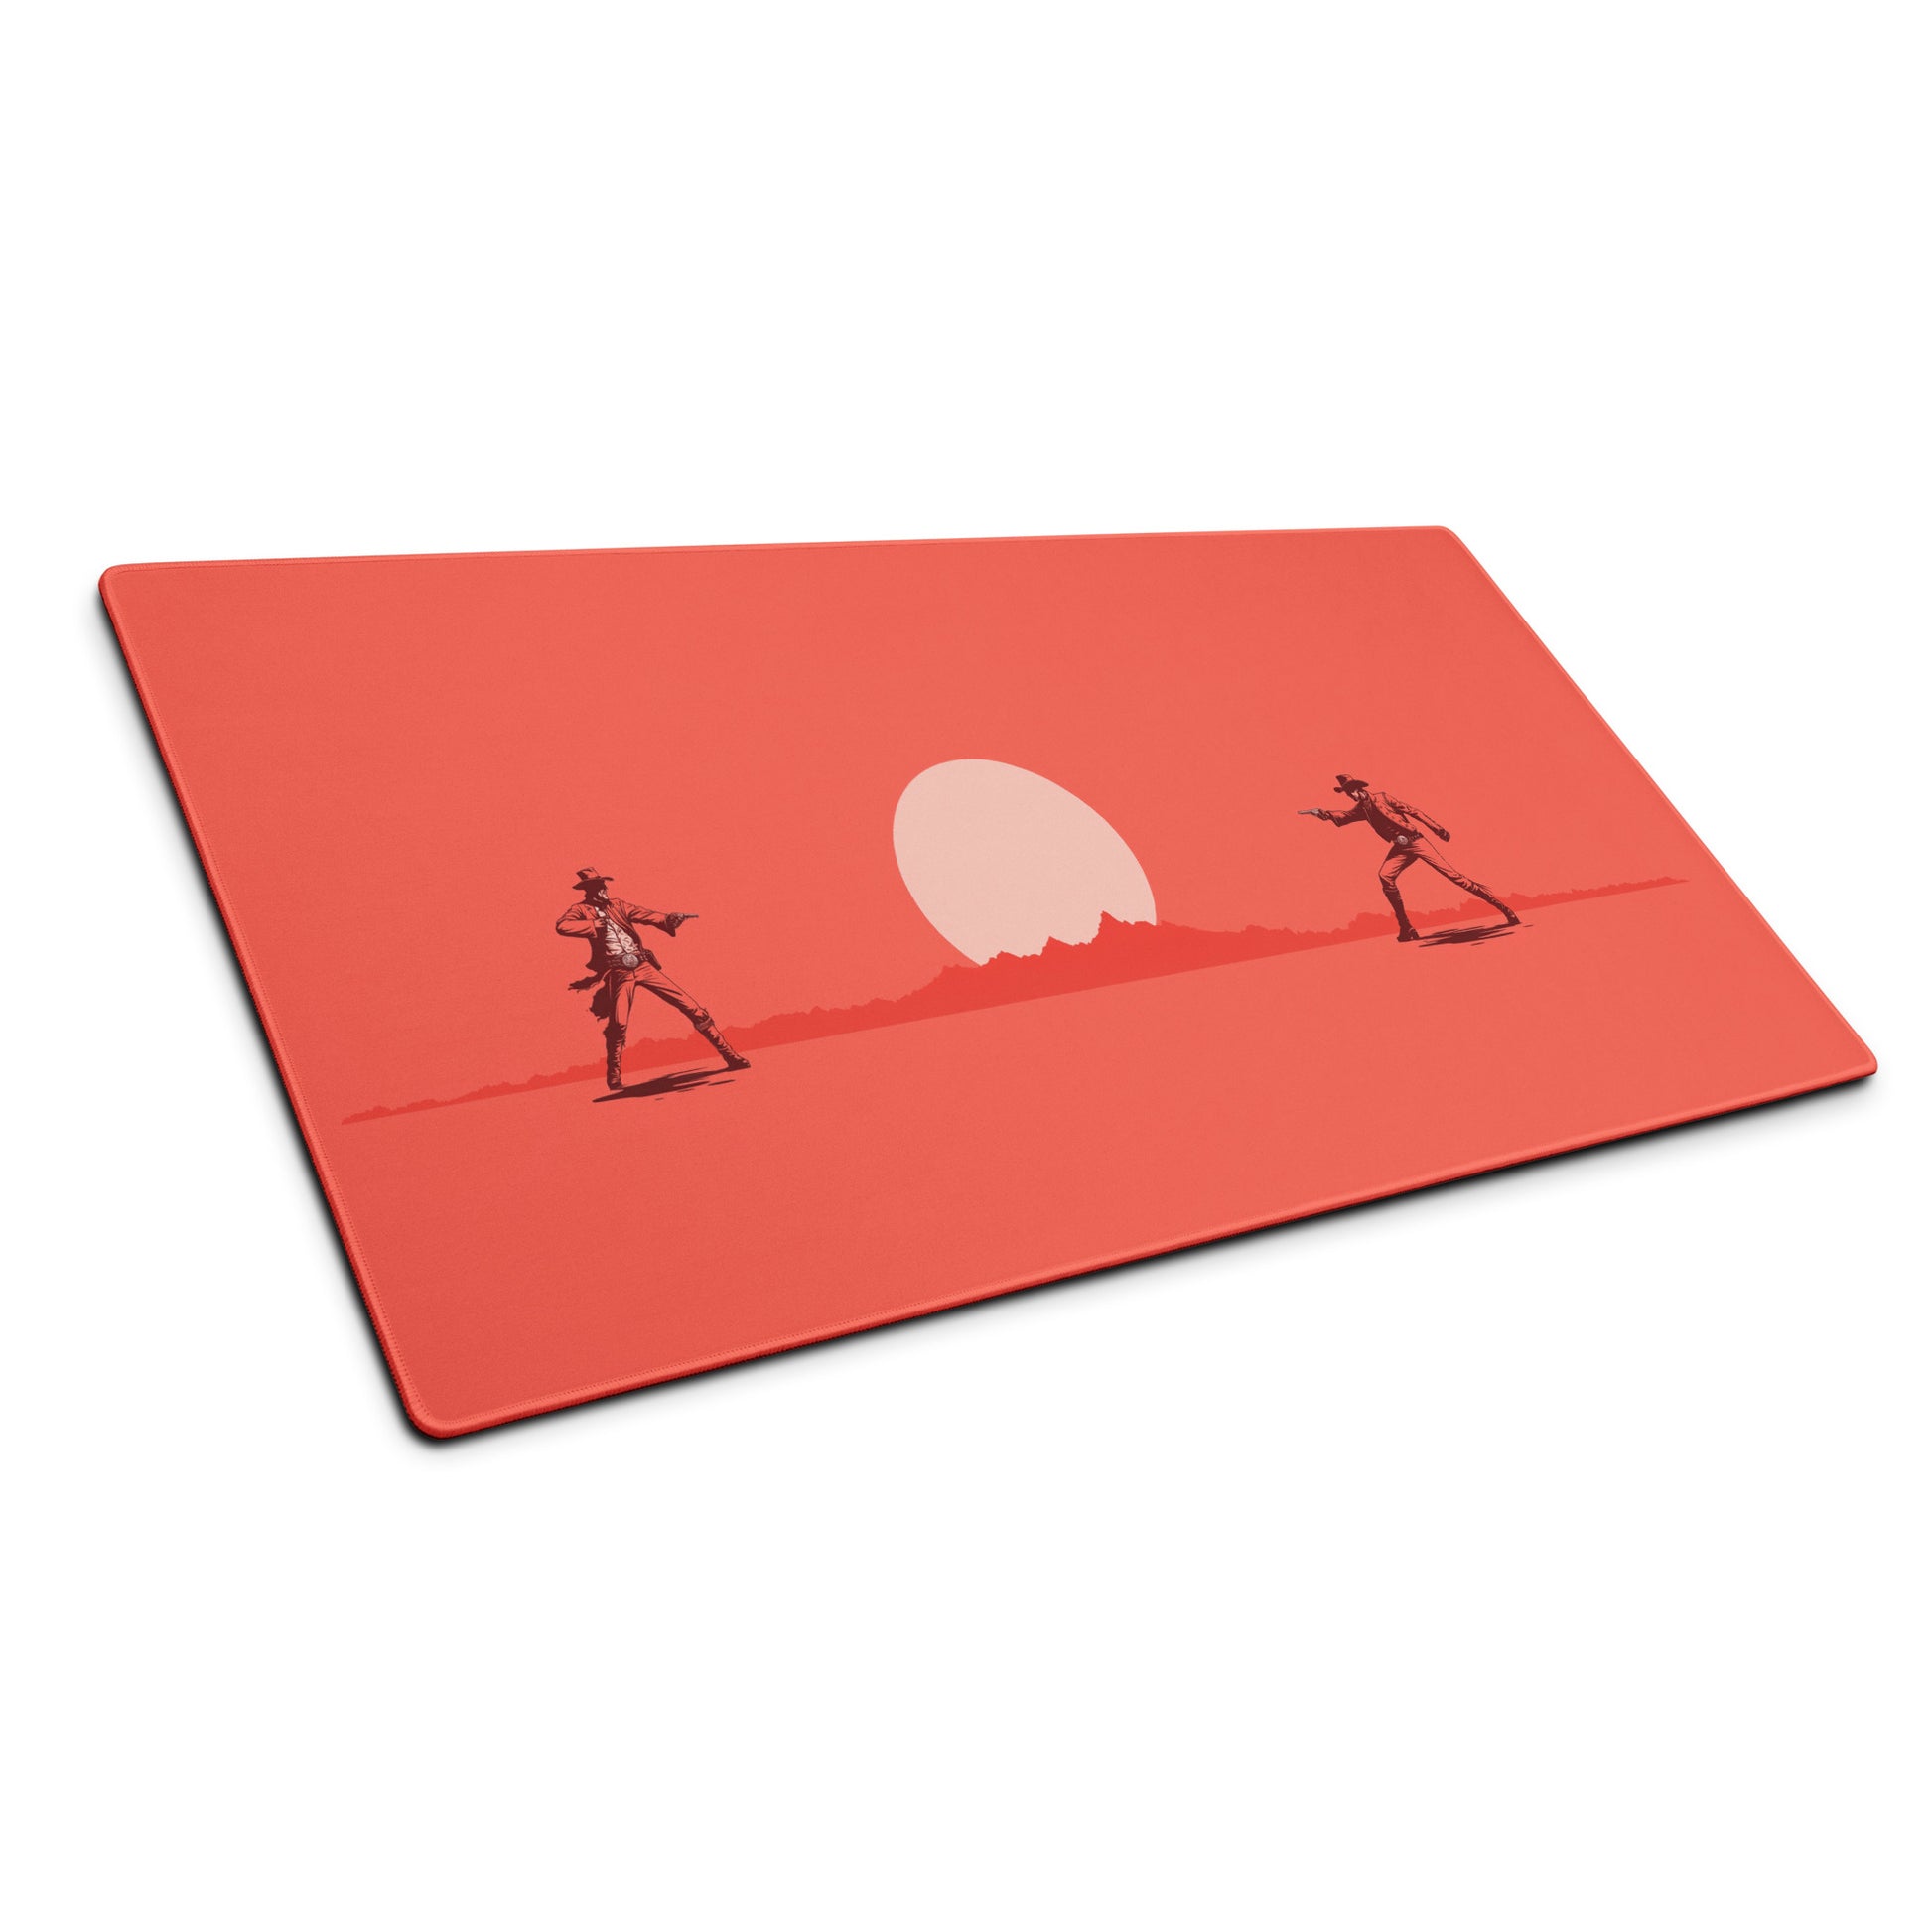 A Red 36" x 18" desk pad with cowboys dueling sitting at an angle.